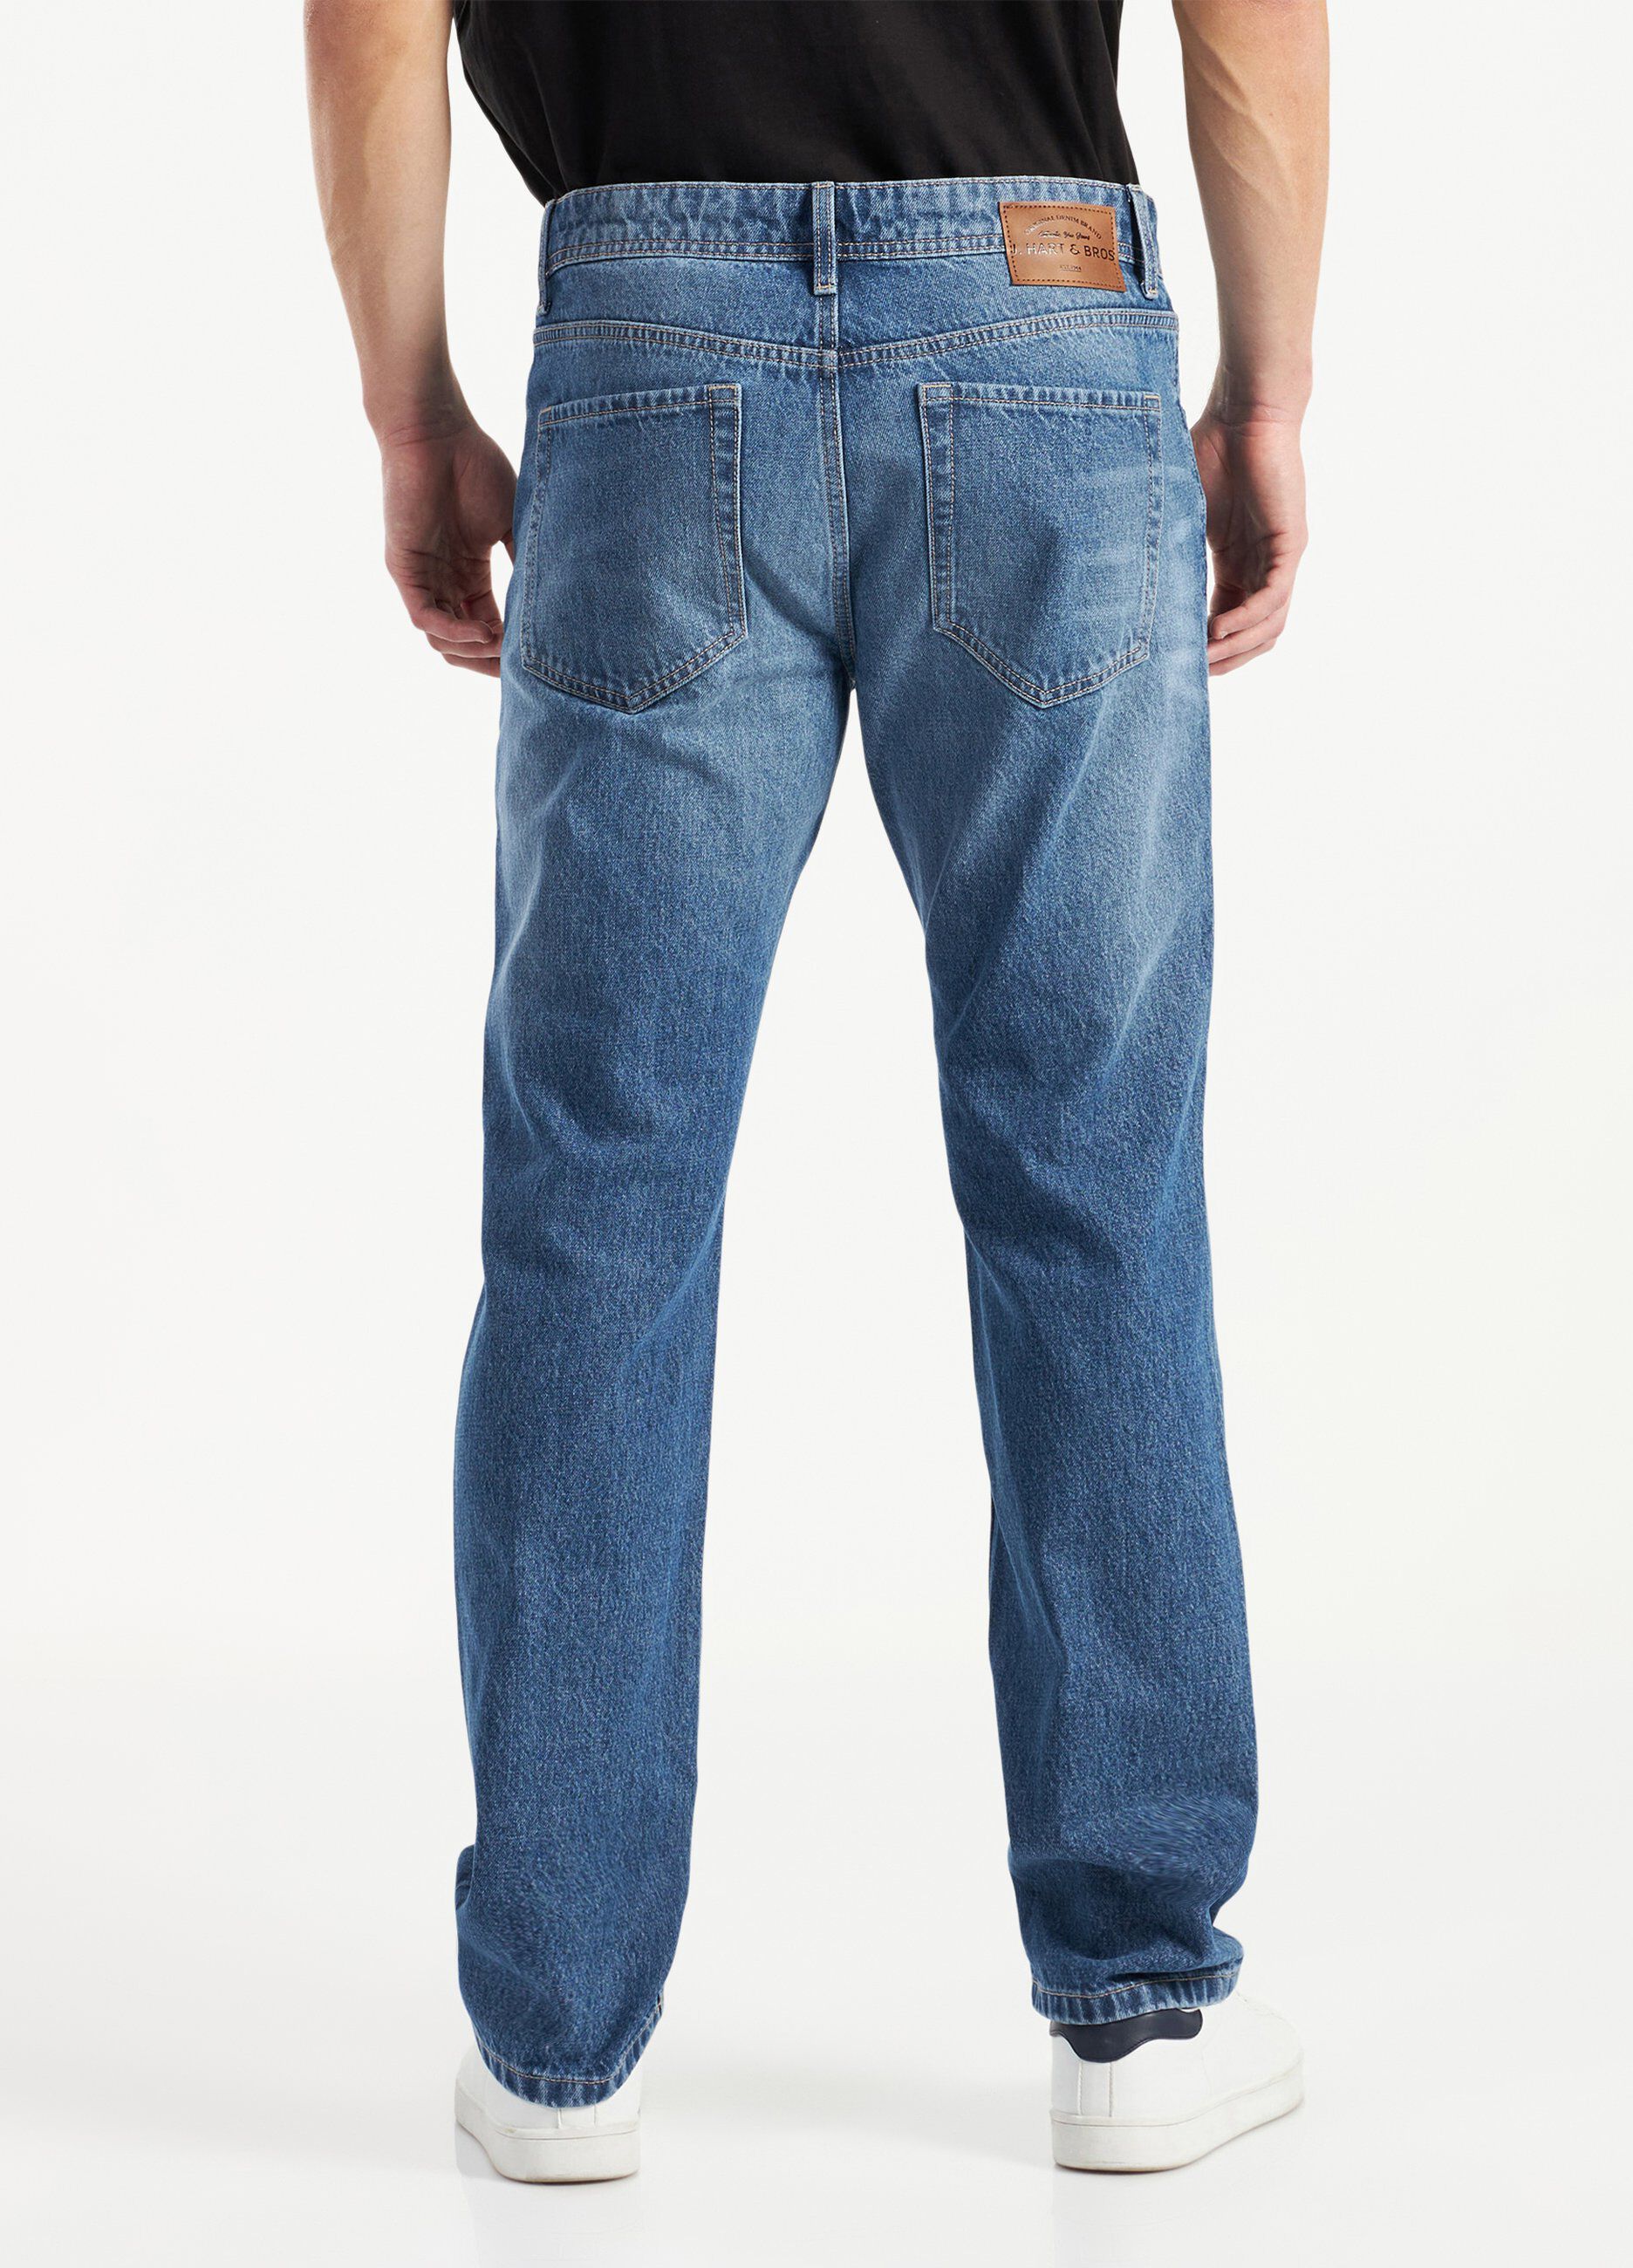 Jeans regular fit stone washed uomo_1